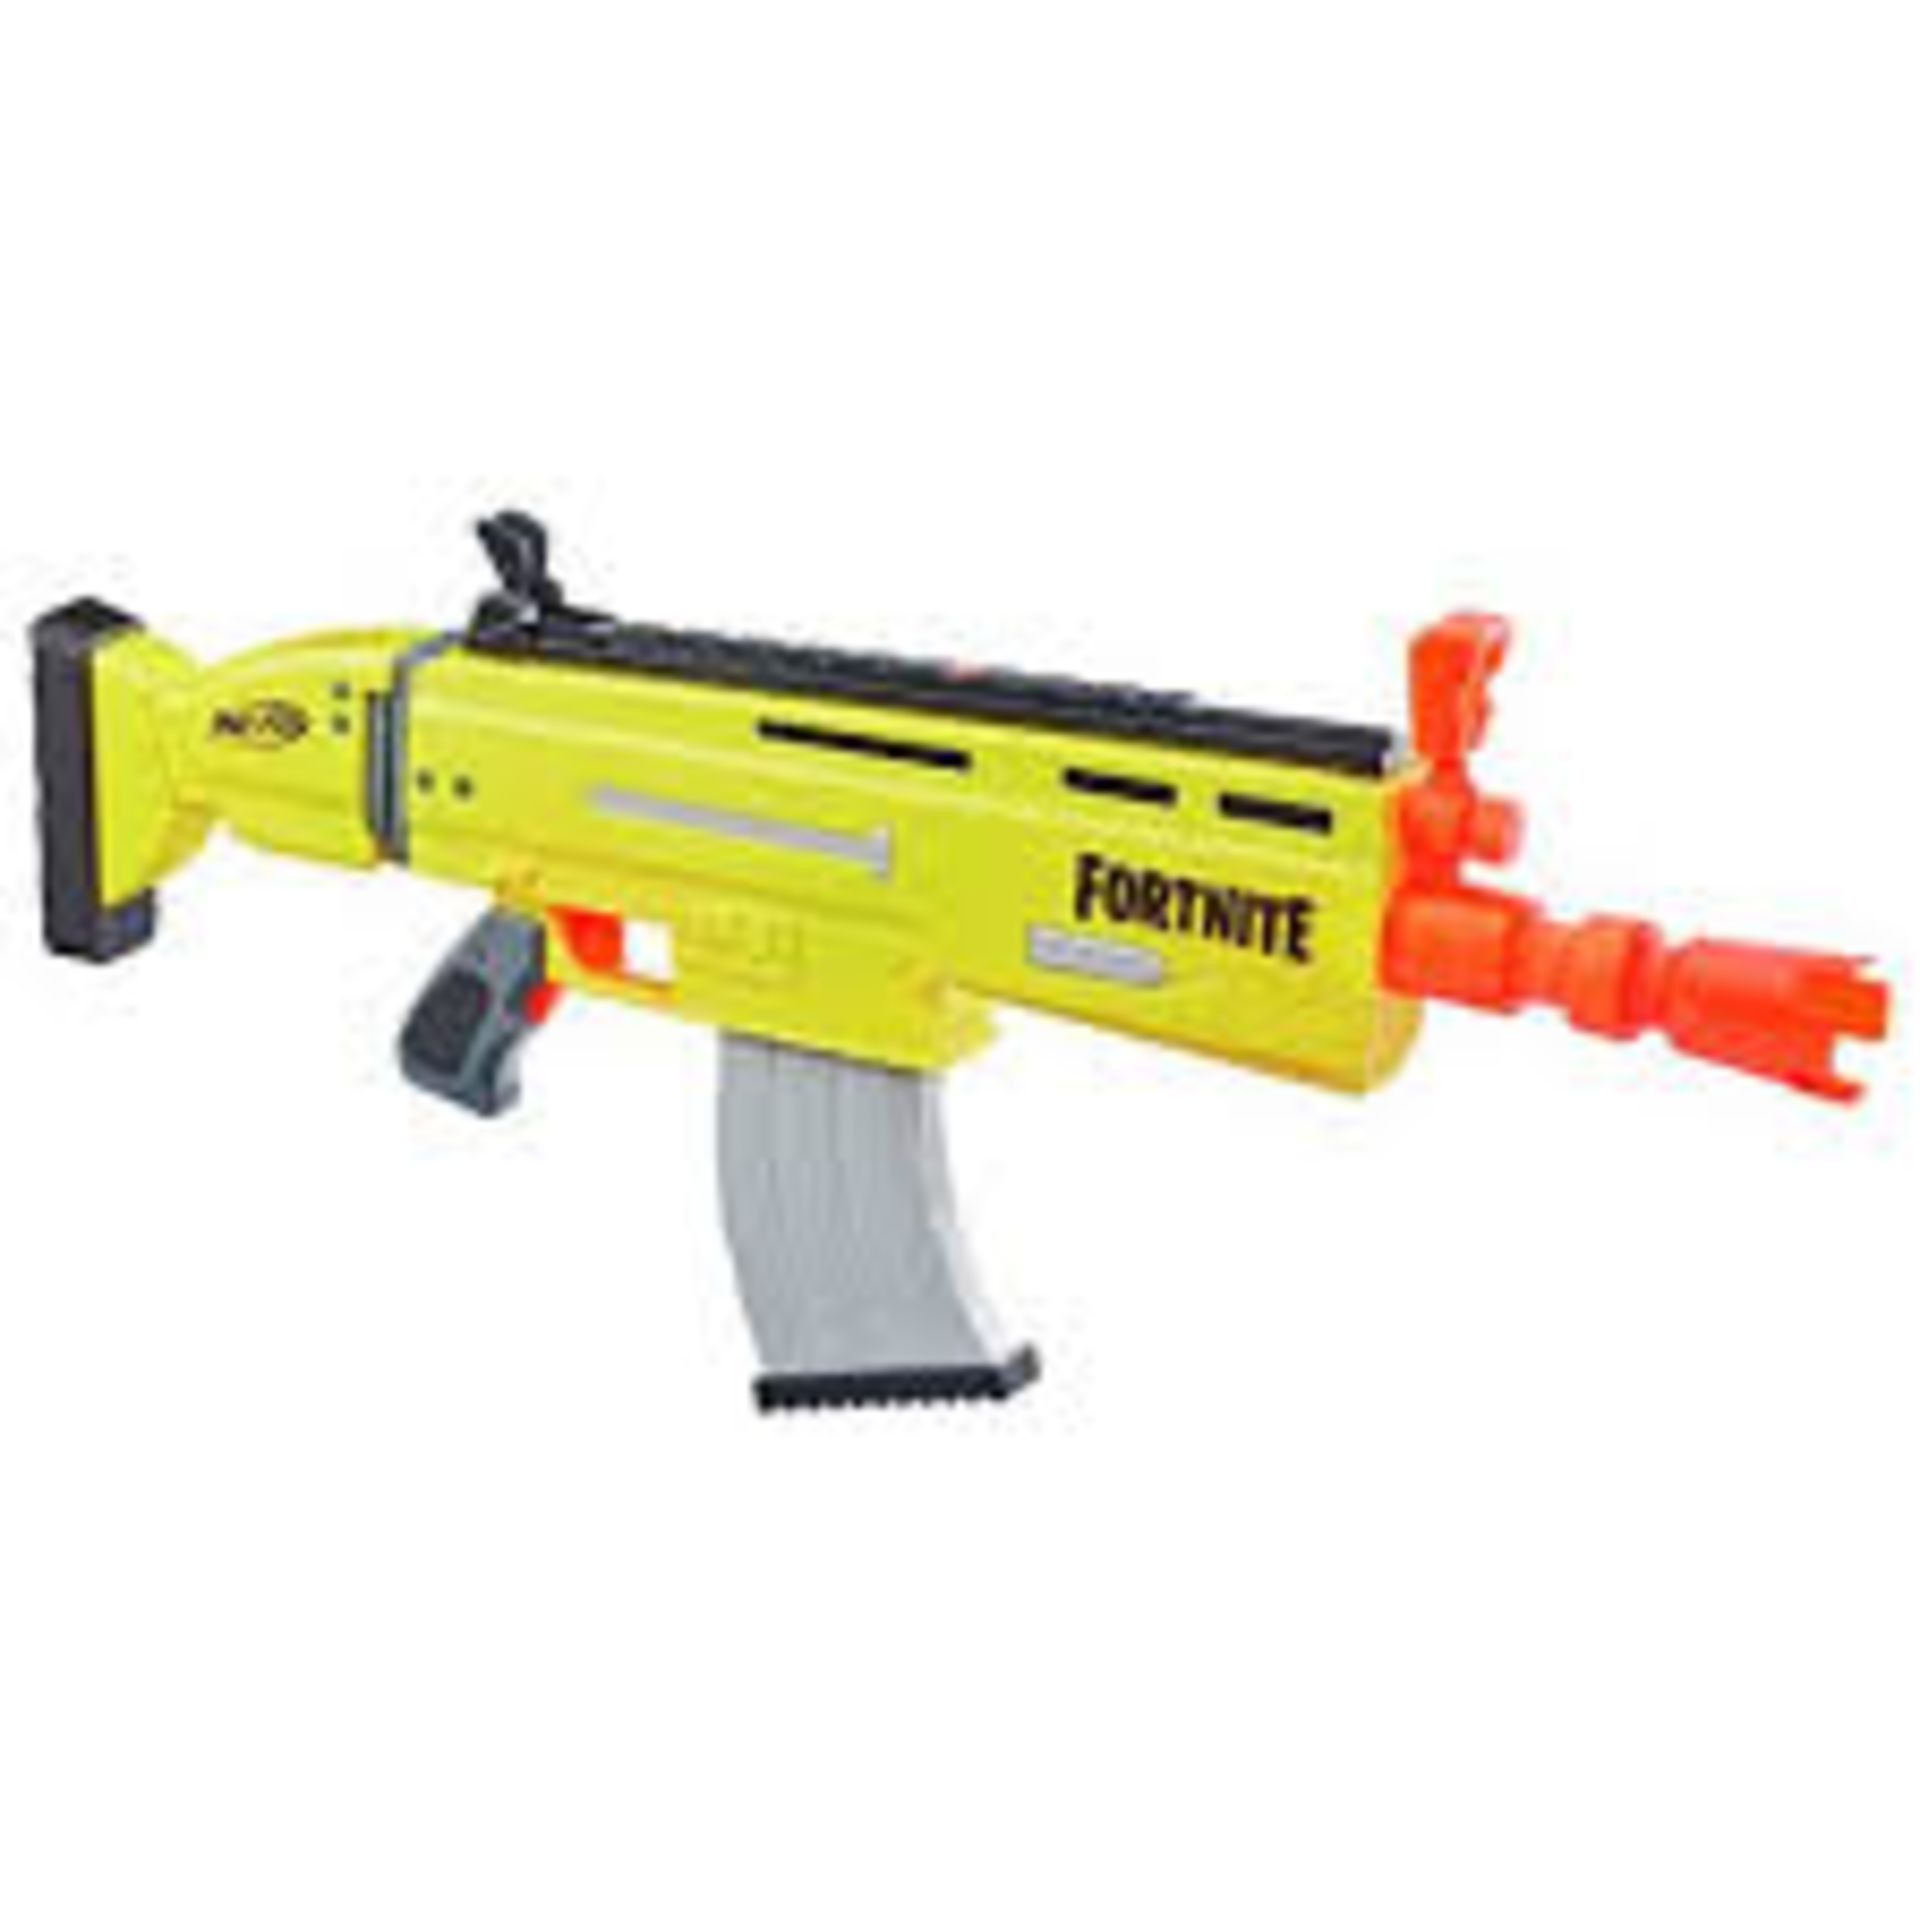 Boxed Fortnite AR-L Motorised Dart Blaster RRP £50 (RET00589657) (Public Viewing and Appraisals